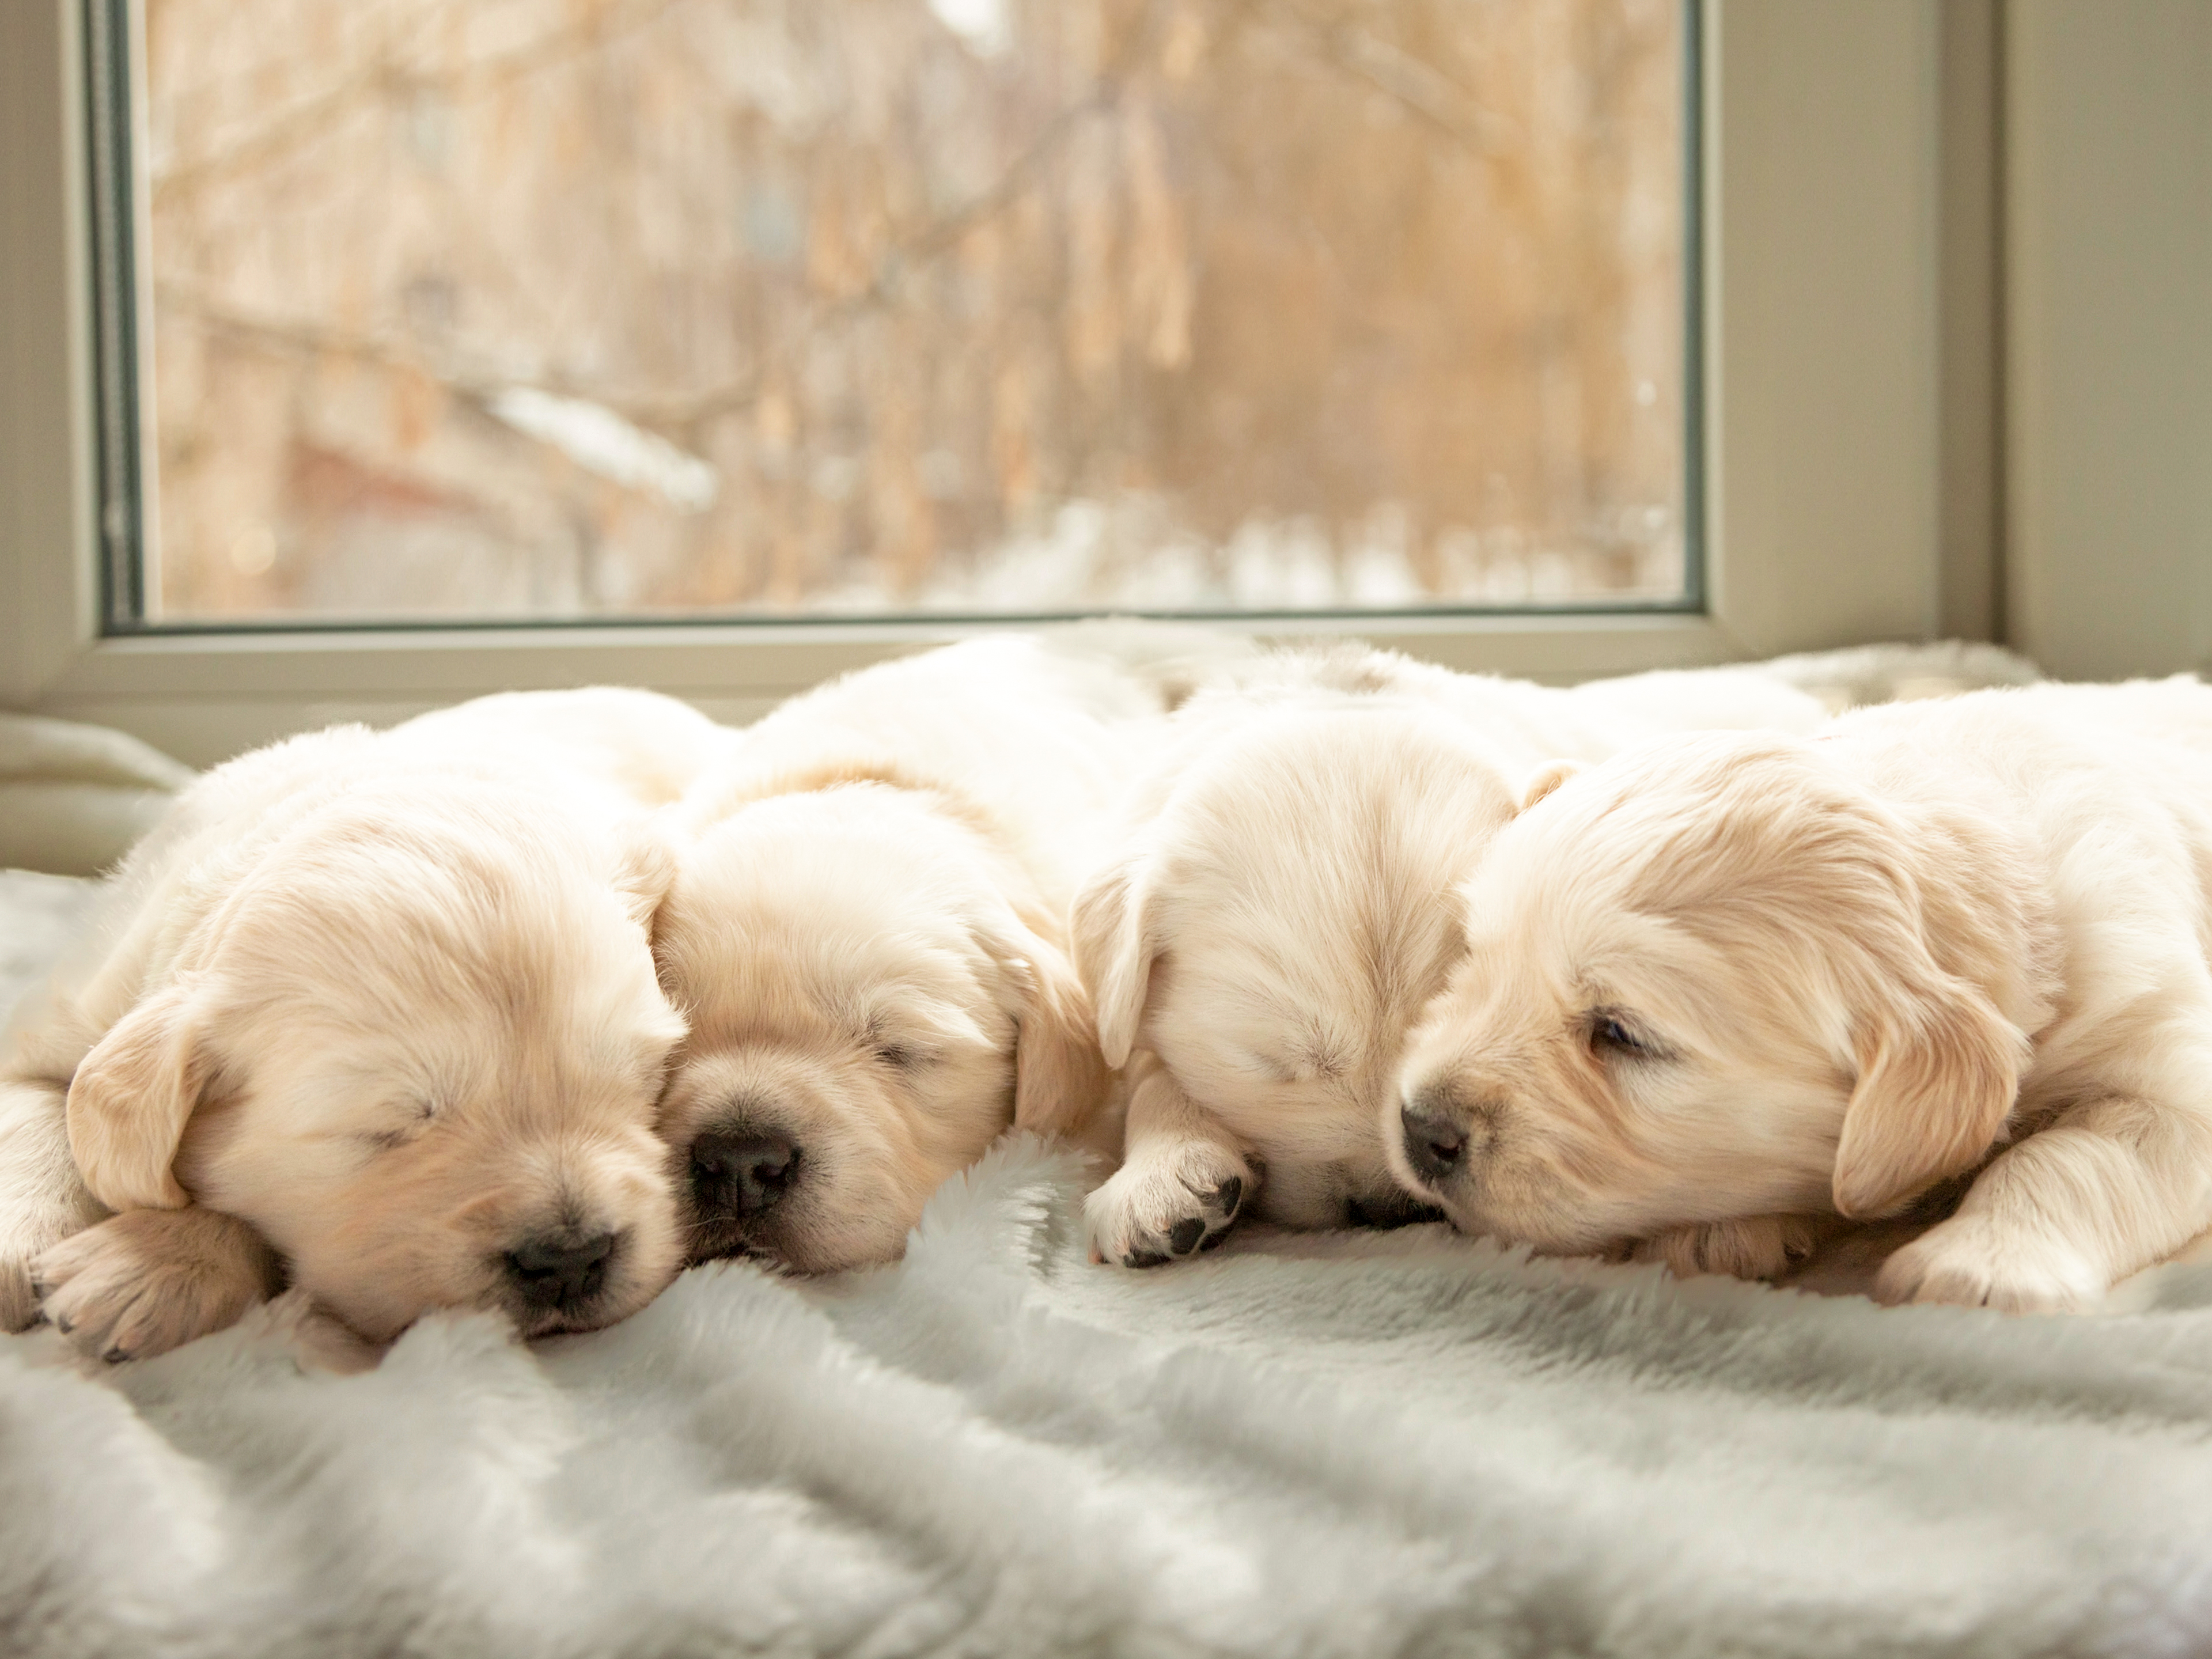 Golden Retriever puppies lying together on a white blanket next to a window